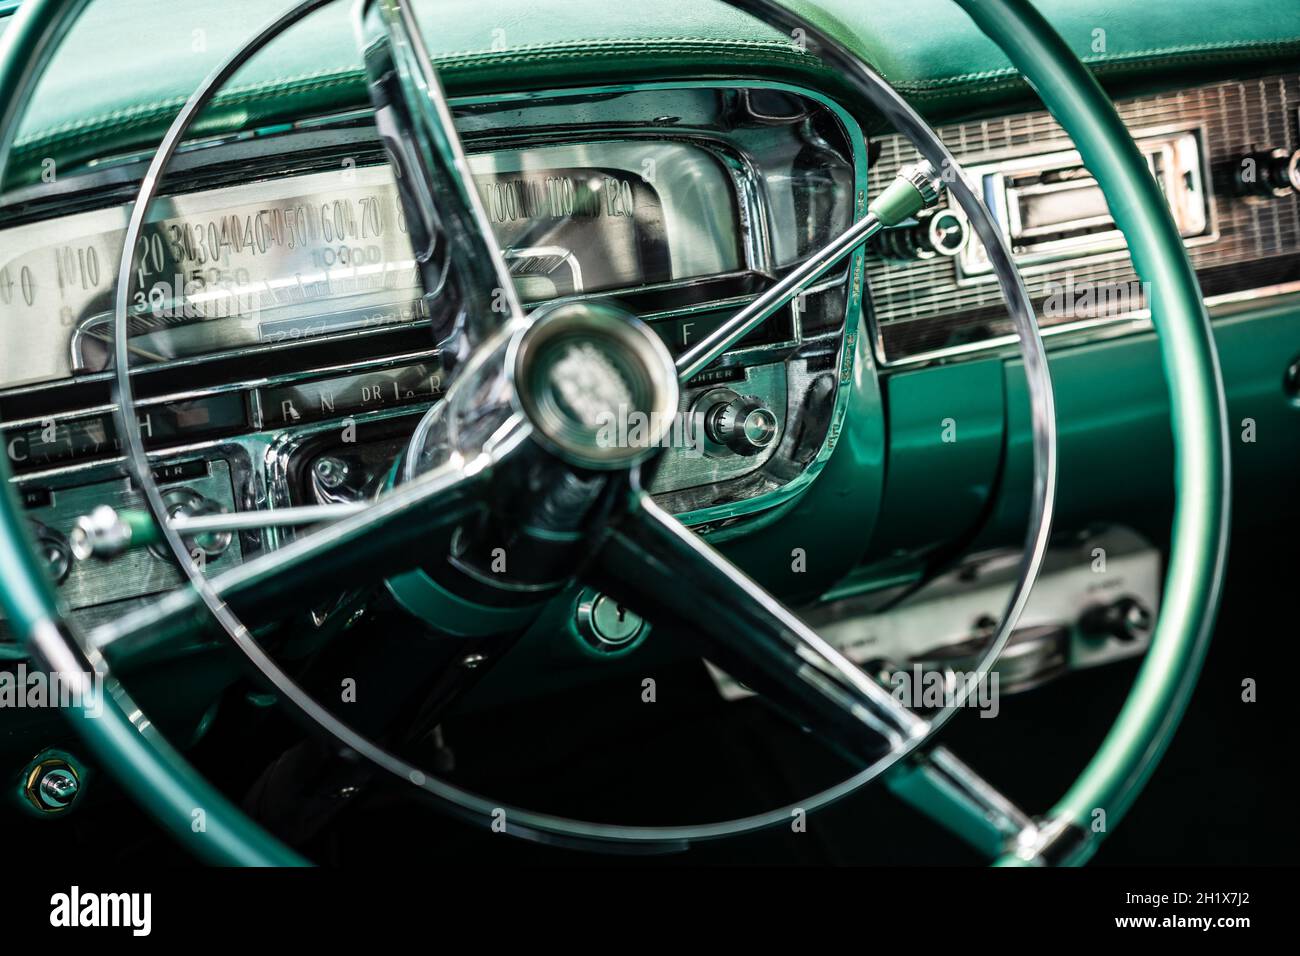 DIEDERSDORF, GERMANY - AUGUST 21, 2021: The dashboard of luxury car Cadillac Series 62 Coupe de Ville, 1953. Close-up. Focus on the background. The ex Stock Photo